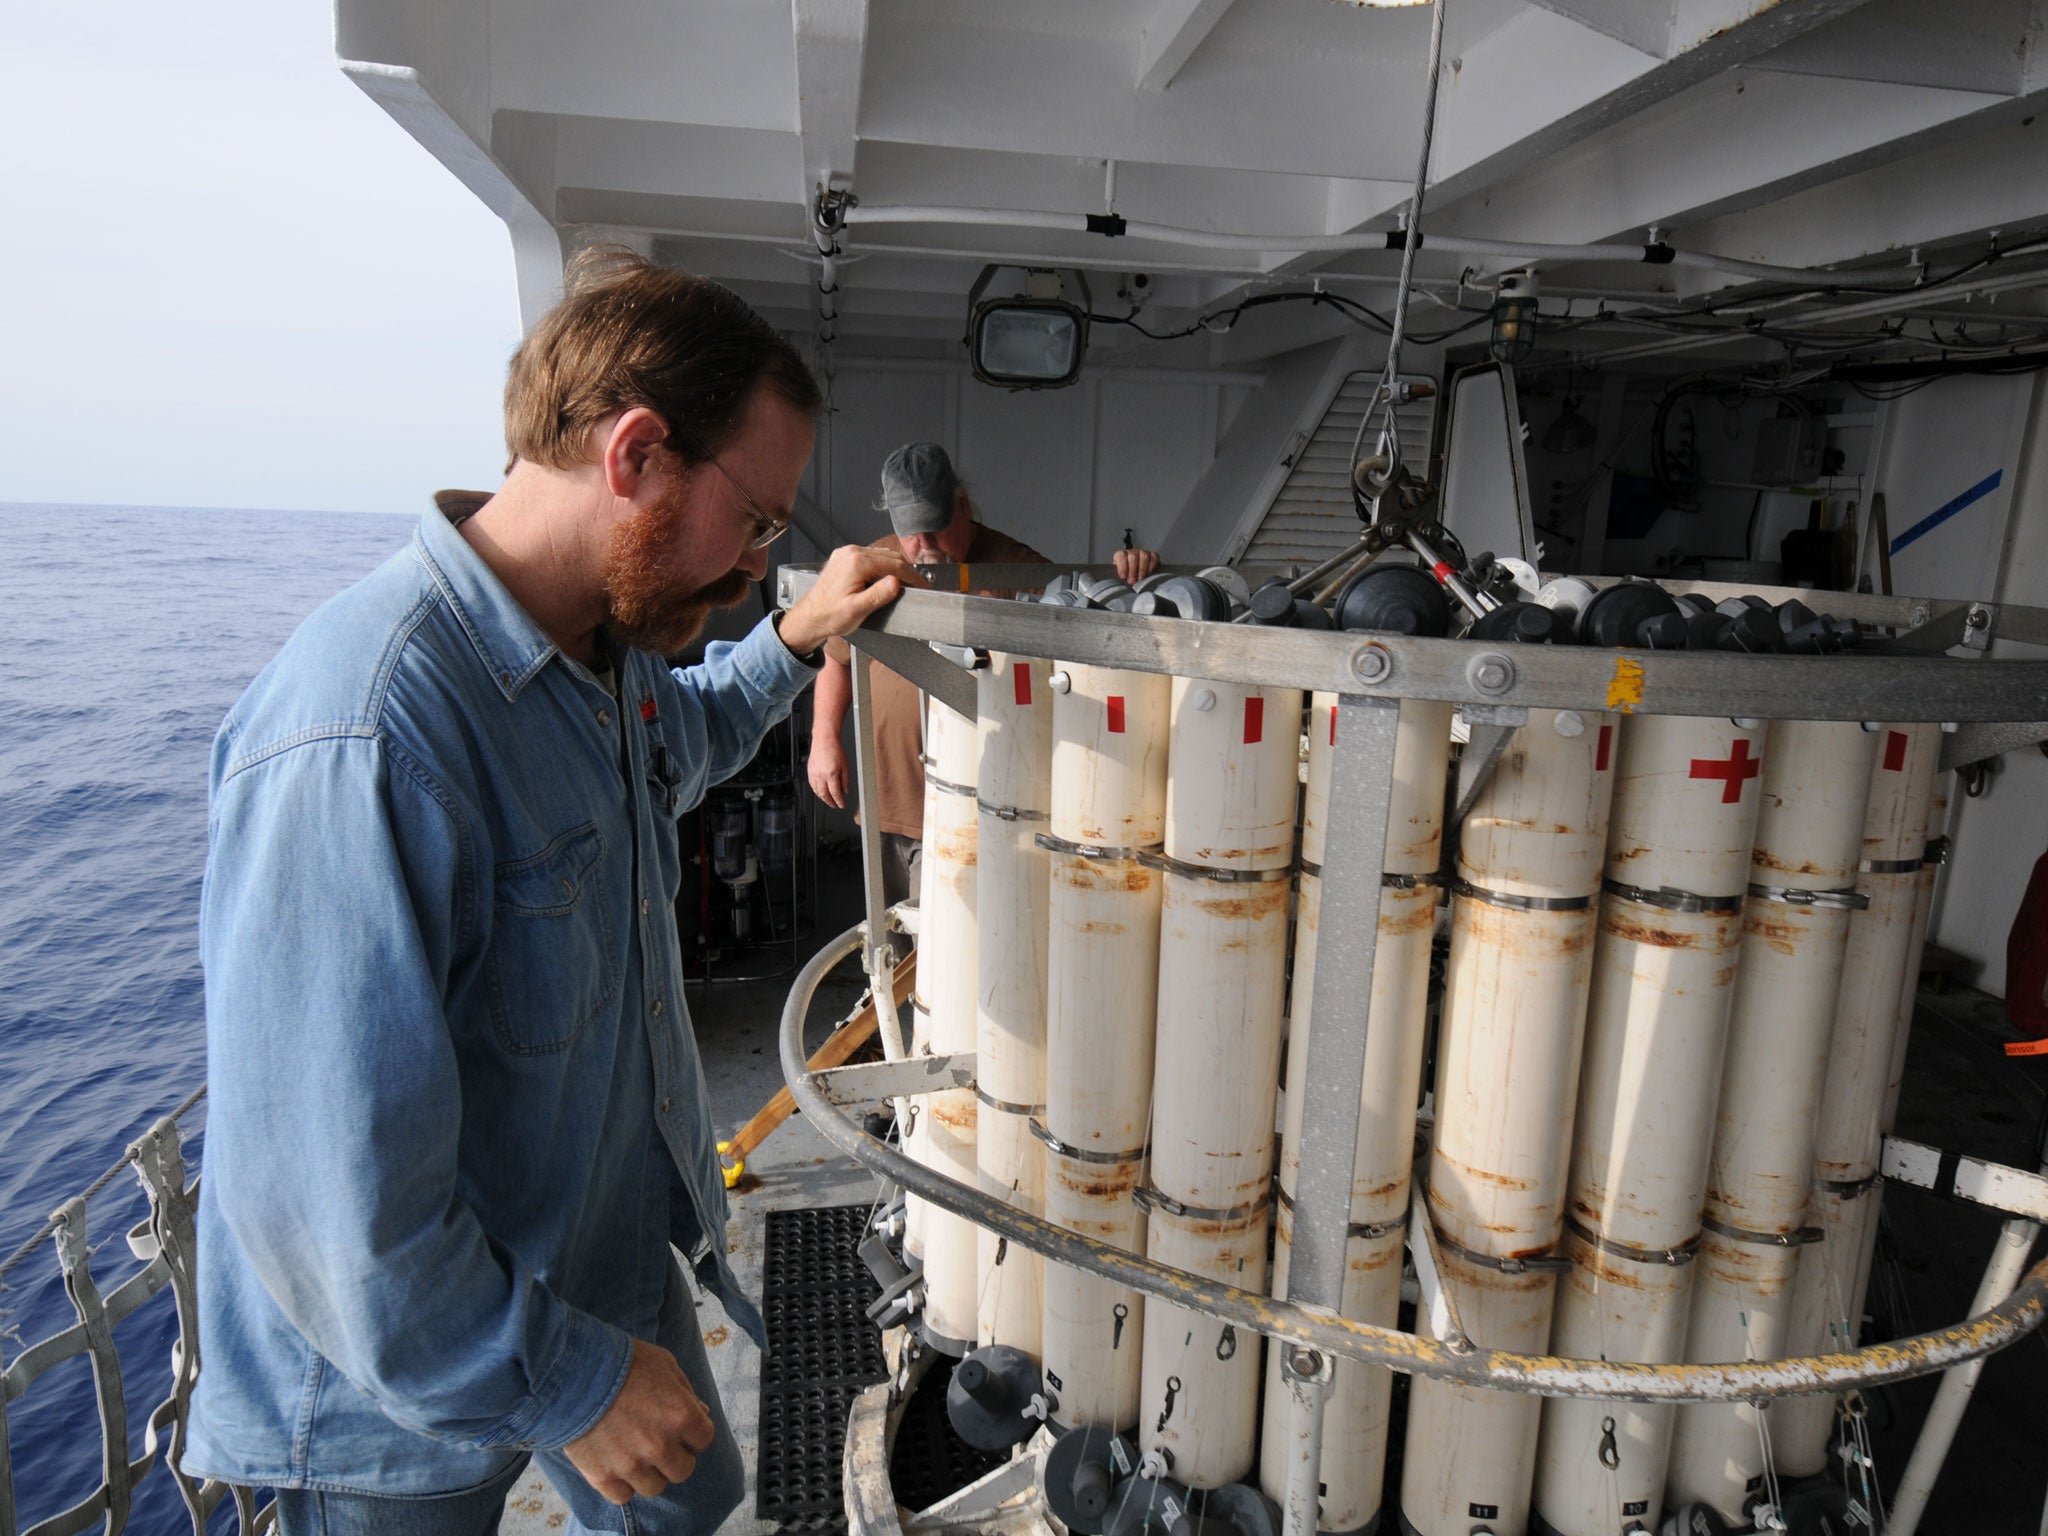 WHOI senior scientist and marine chemist Ken Buesseler (foreground) checks a CTD sampler prior to deploying the instrument to collect data and water samples from the ocean off the coast of Fukushima, Japan, in 2011.